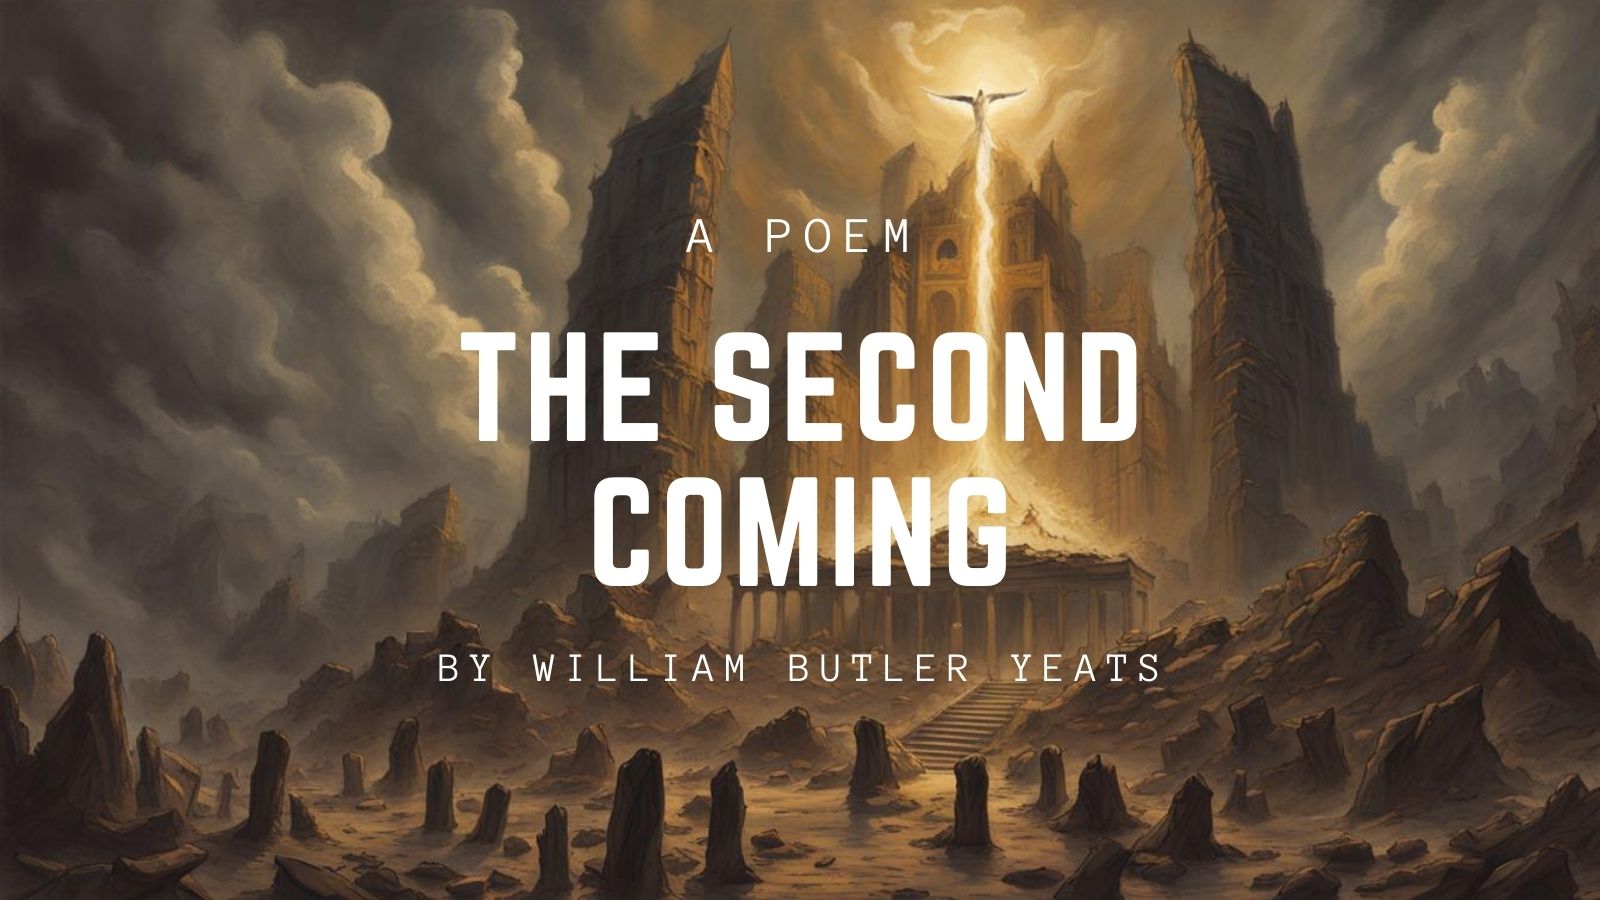 The Second Coming by W. B. Yeats